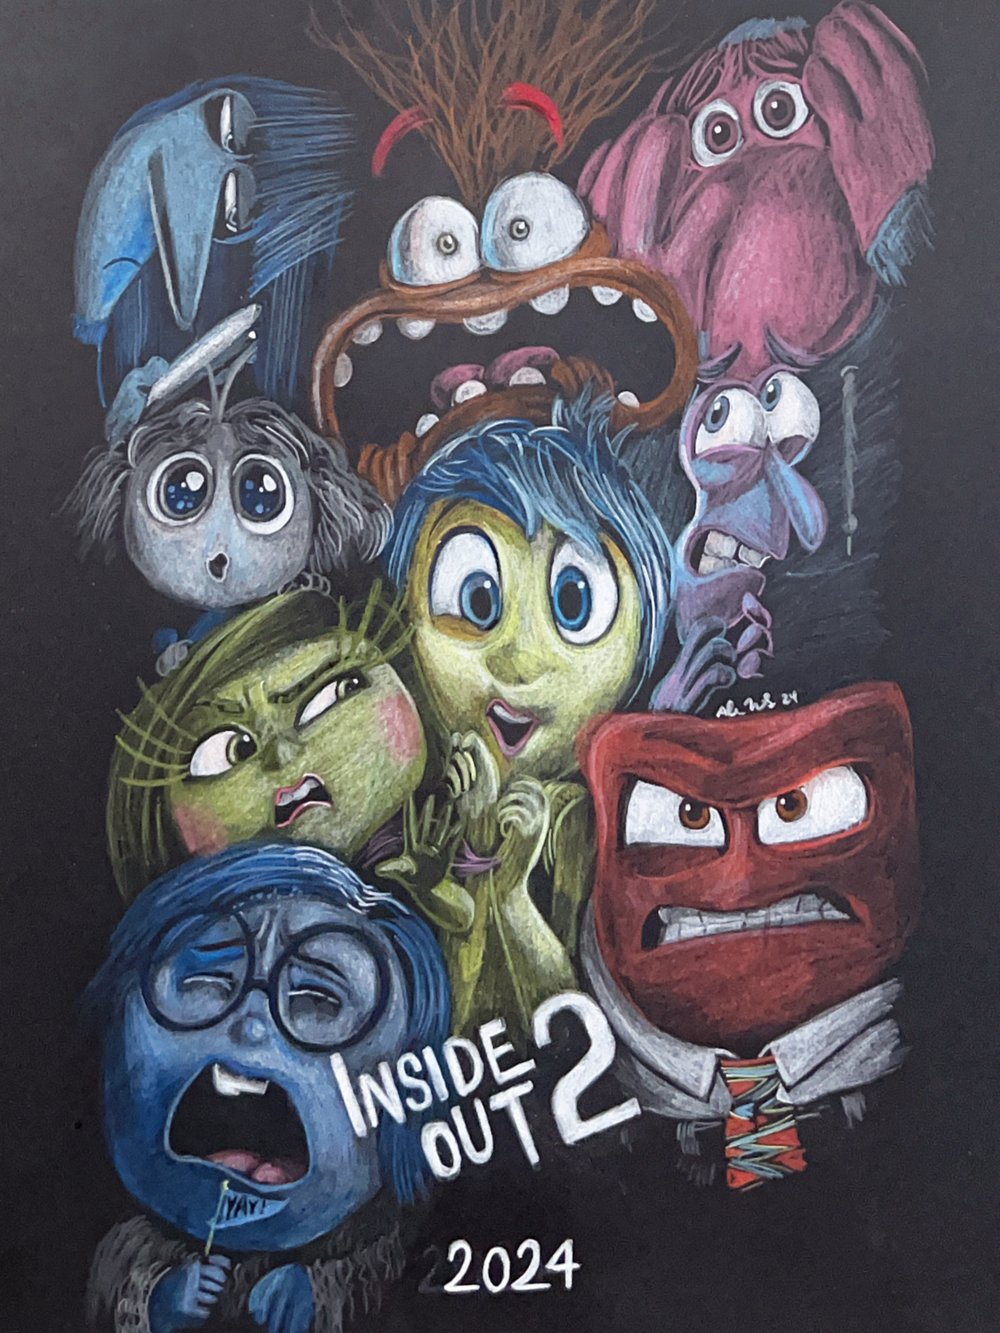 Image of “New Emotions” INSIDE OUT 2 Art Print